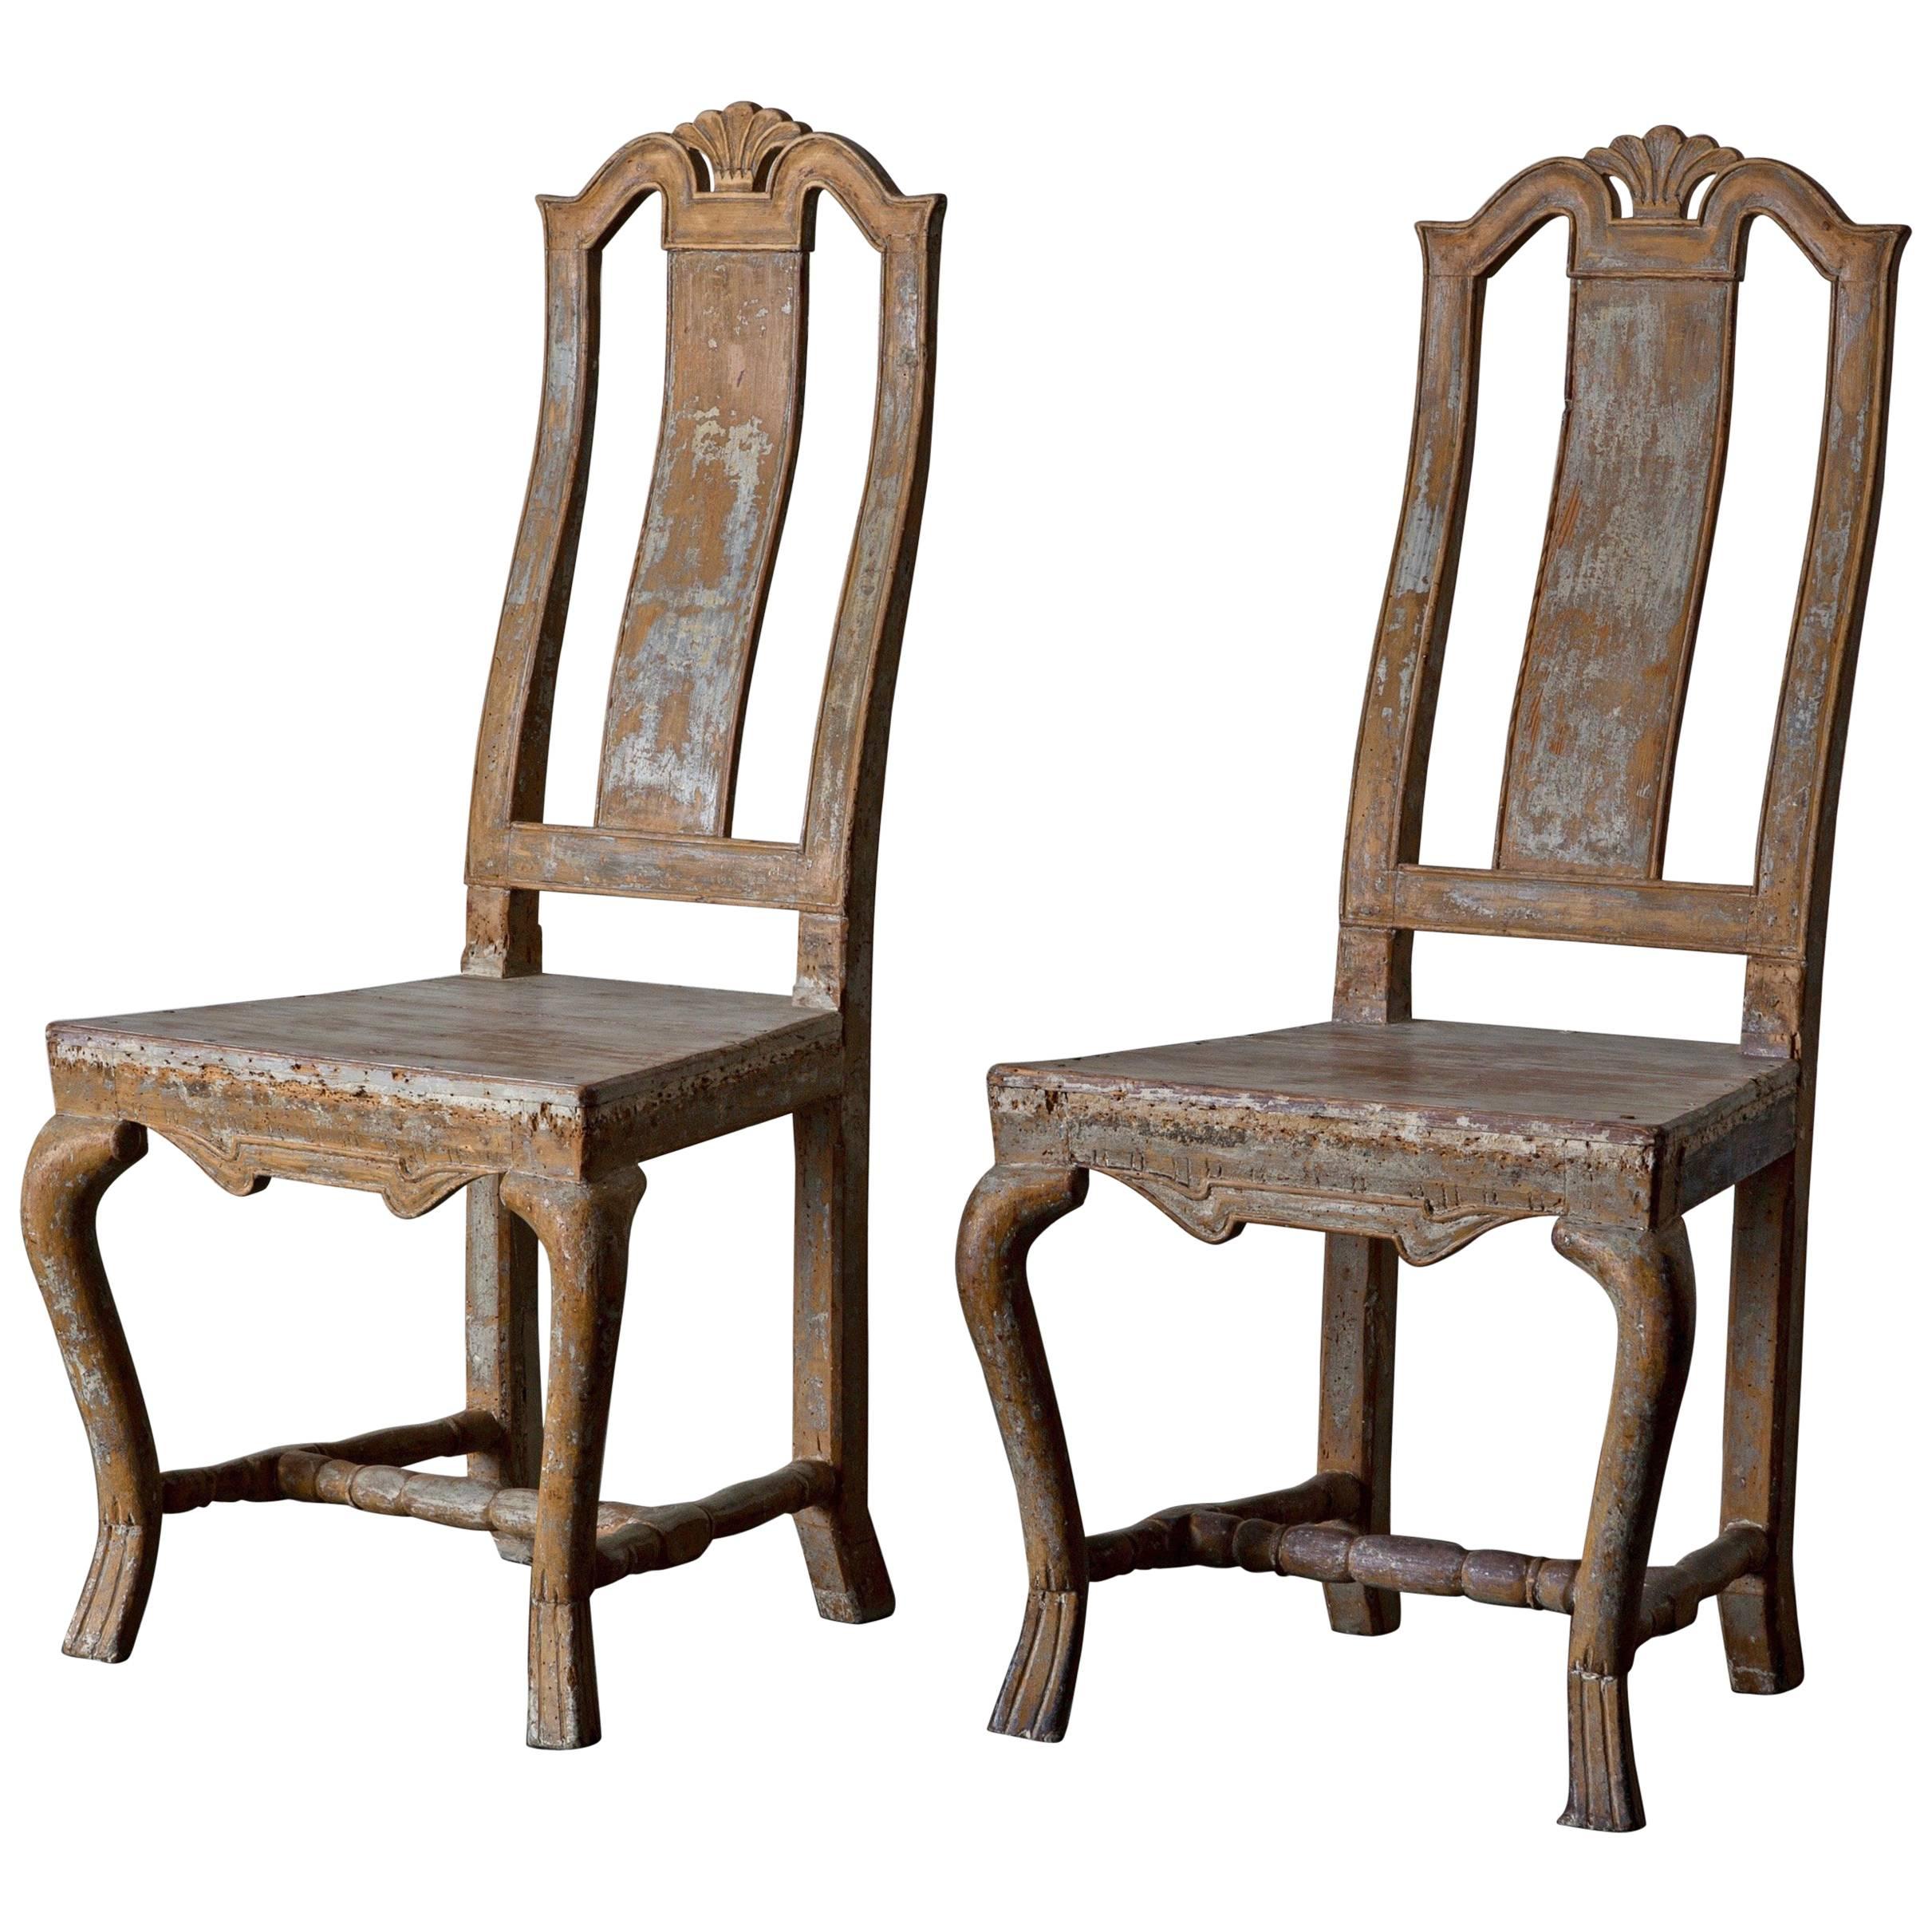 Chairs Side Chairs Swedish Baroque, 18th Century, Sweden